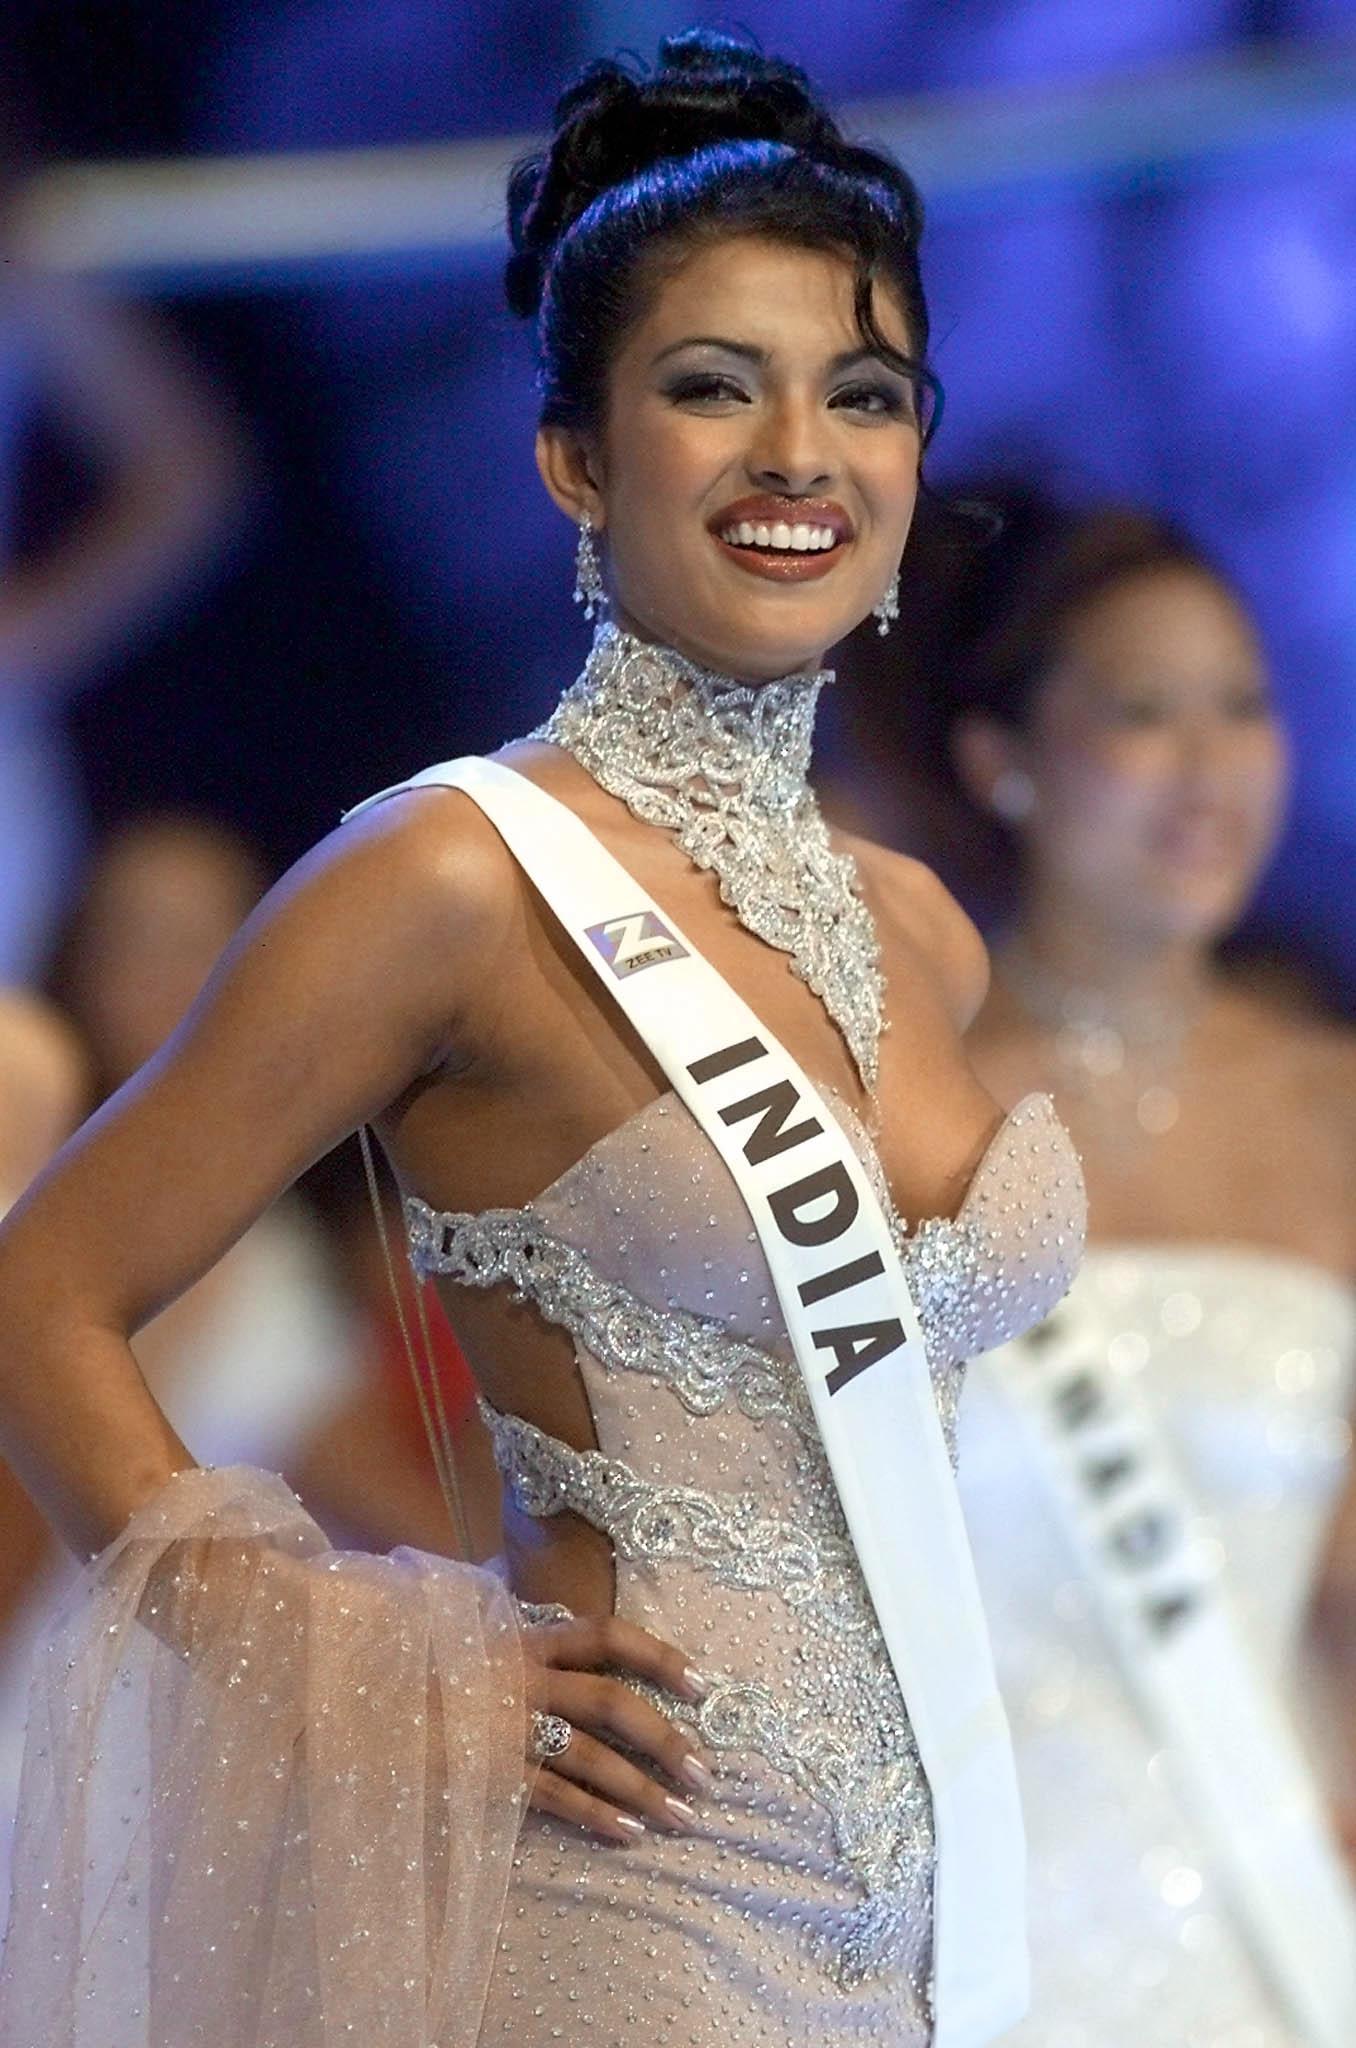 16 Celebrities Who Were Pageant Stars